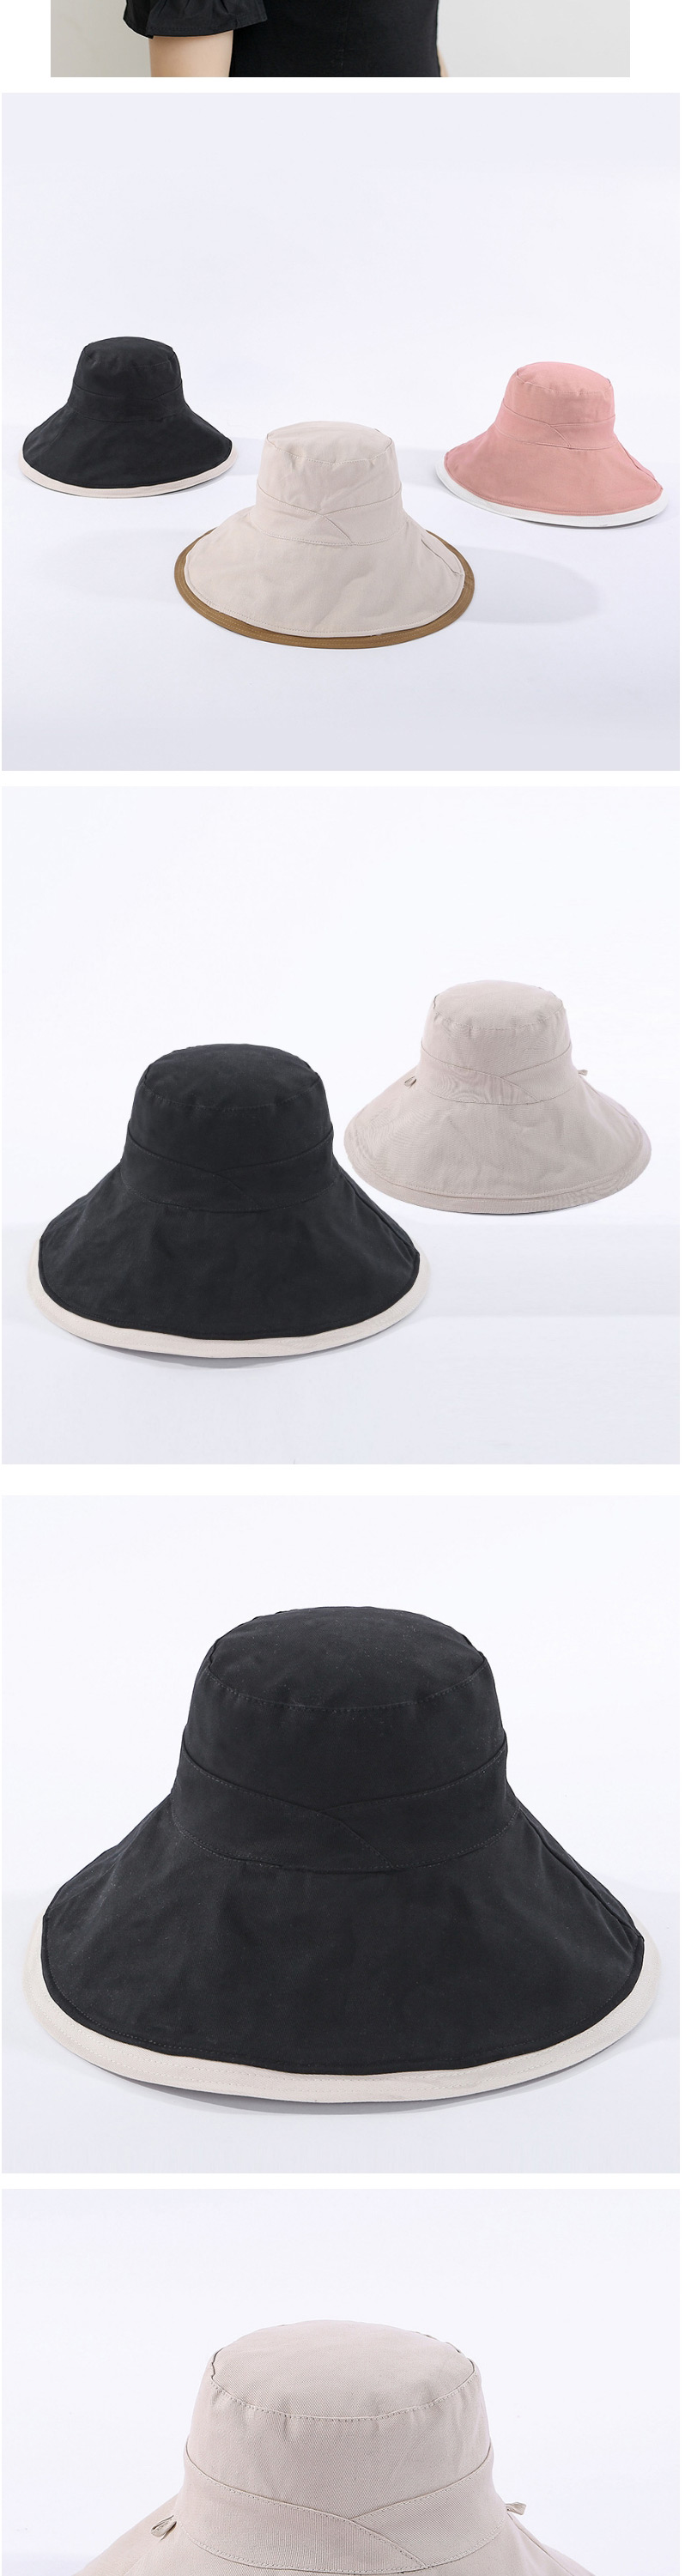 Fashion Black Cotton Double-sided Fisherman Hat,Beanies&Others